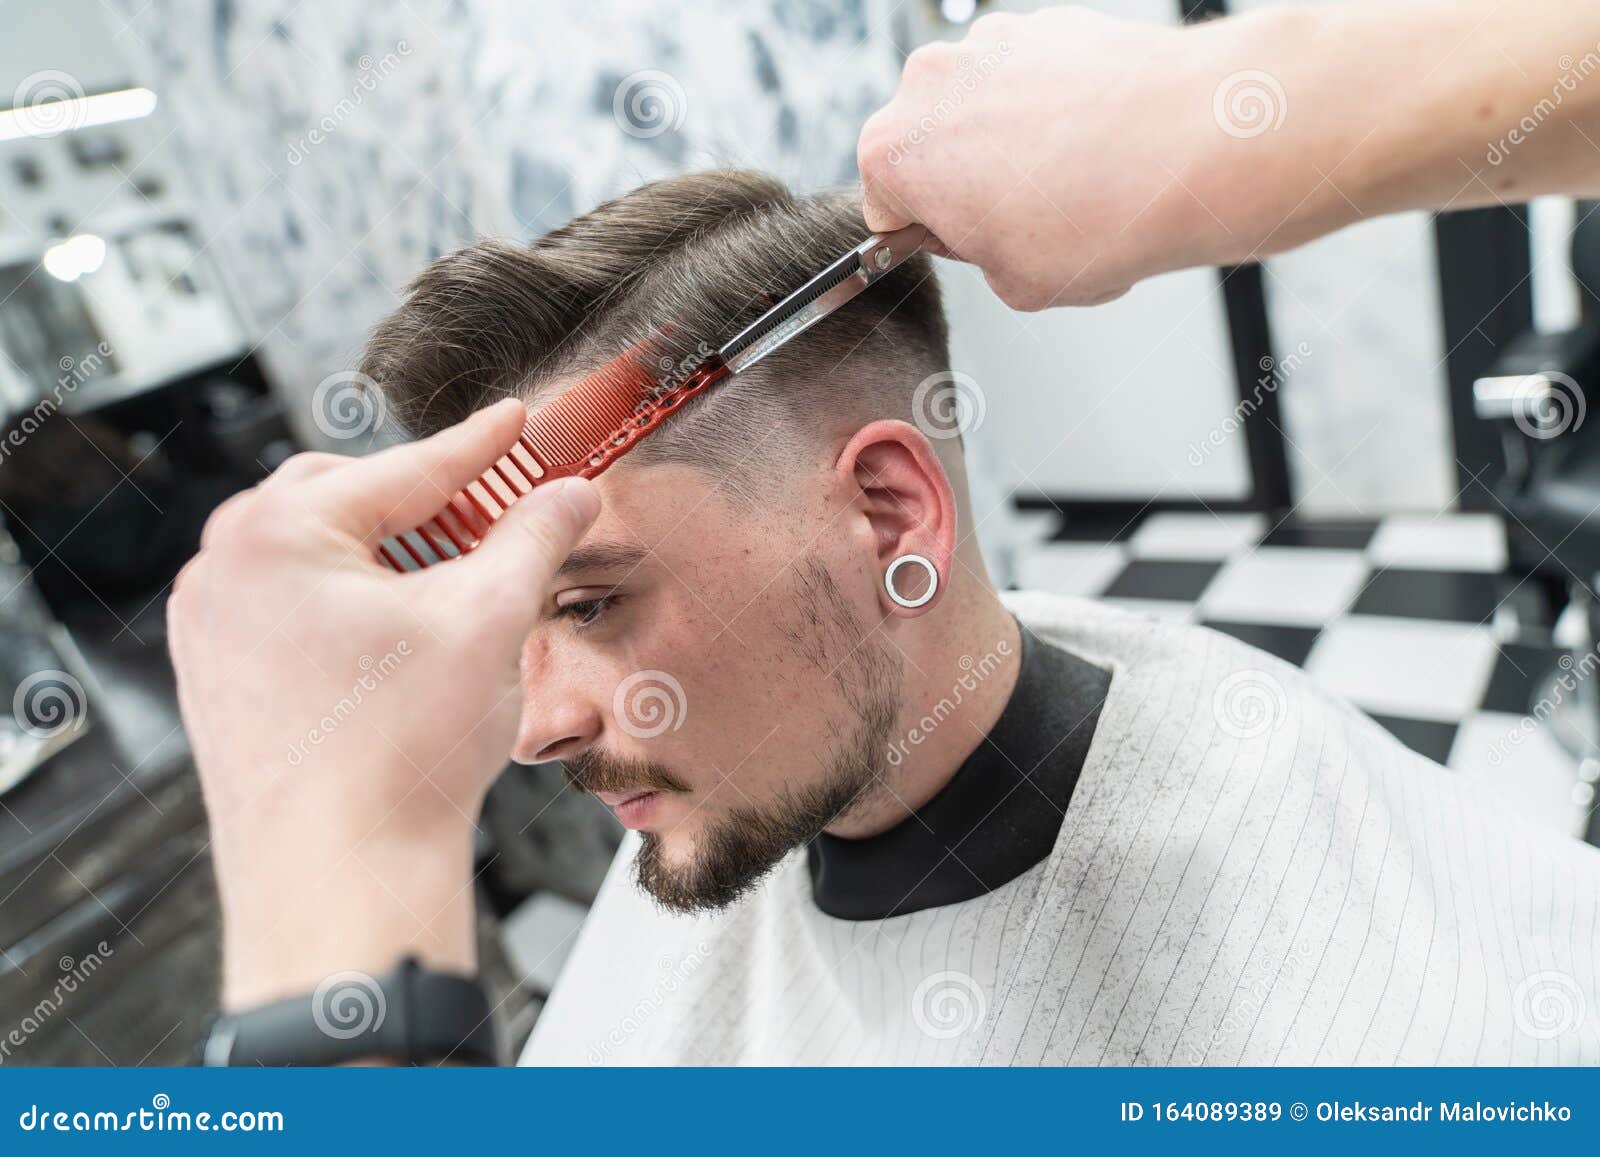 Haircut in a Hairdresser. New Haircut Style. Stock Image - Image of barber,  caucasian: 164089389